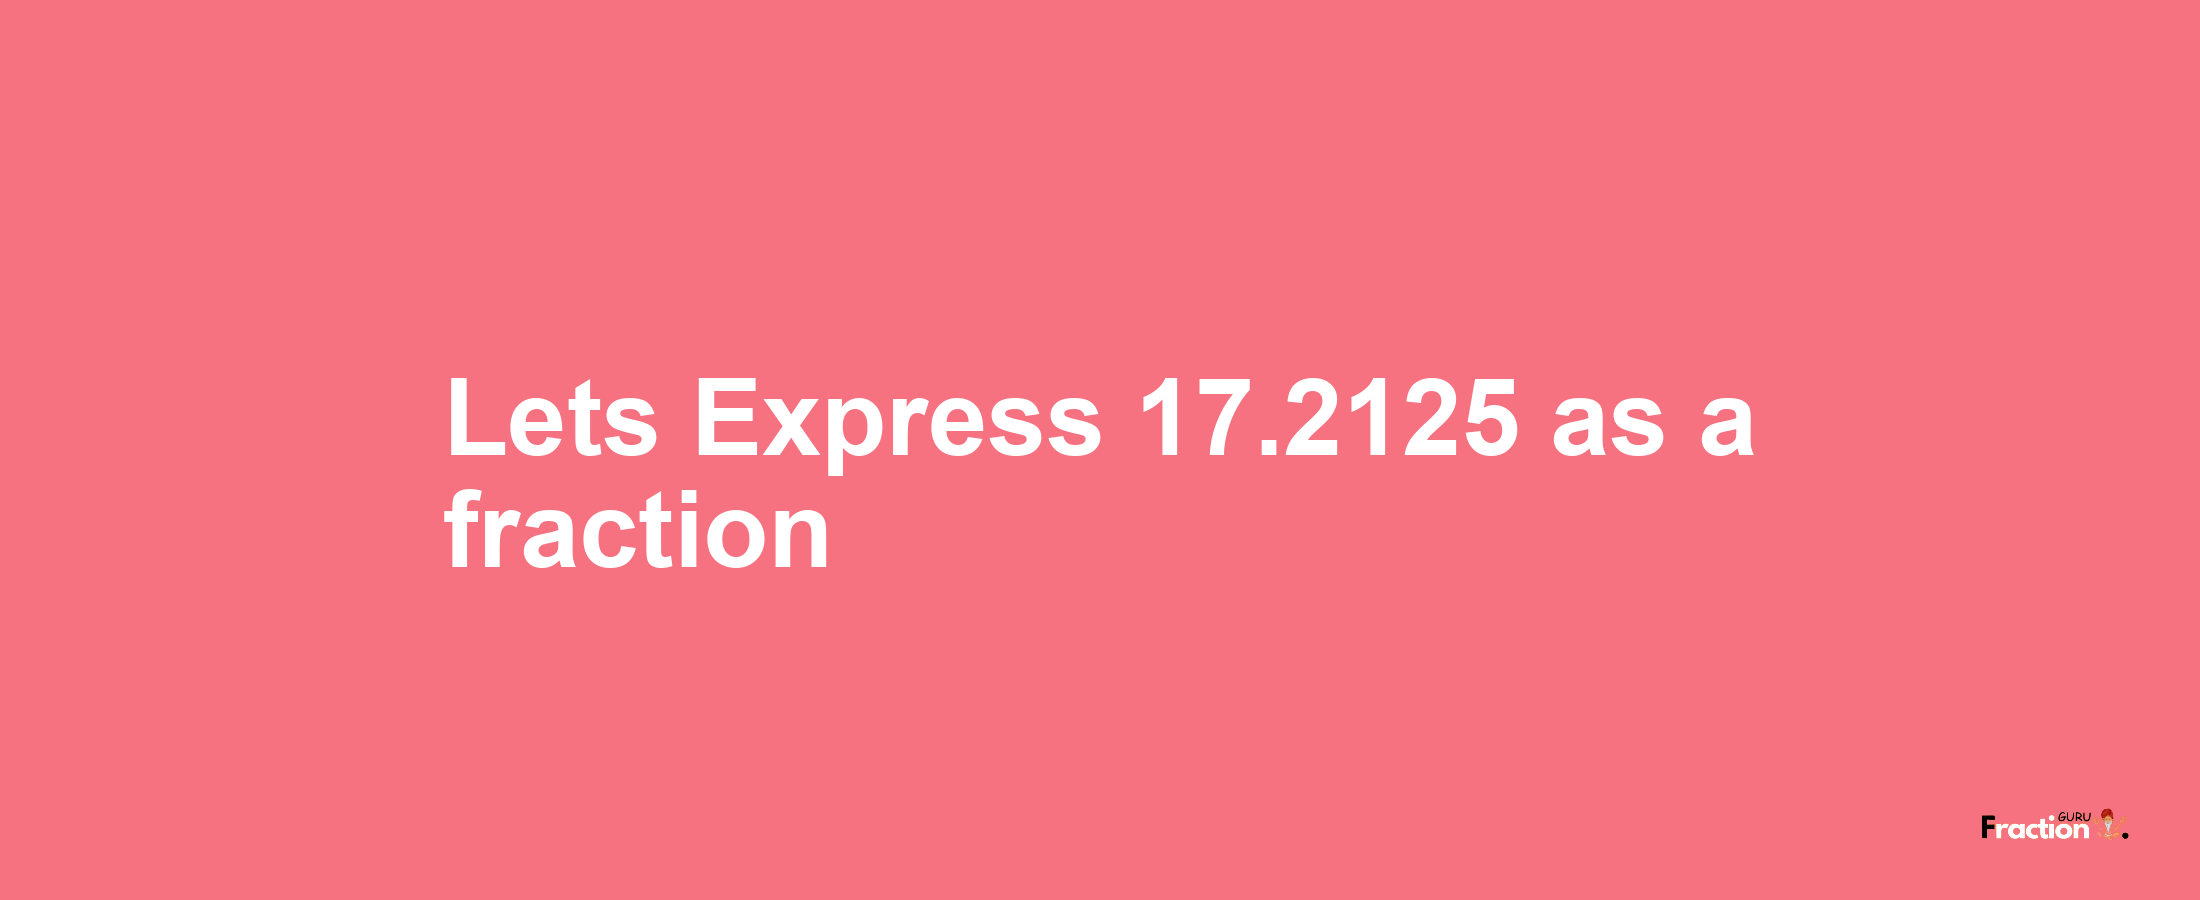 Lets Express 17.2125 as afraction